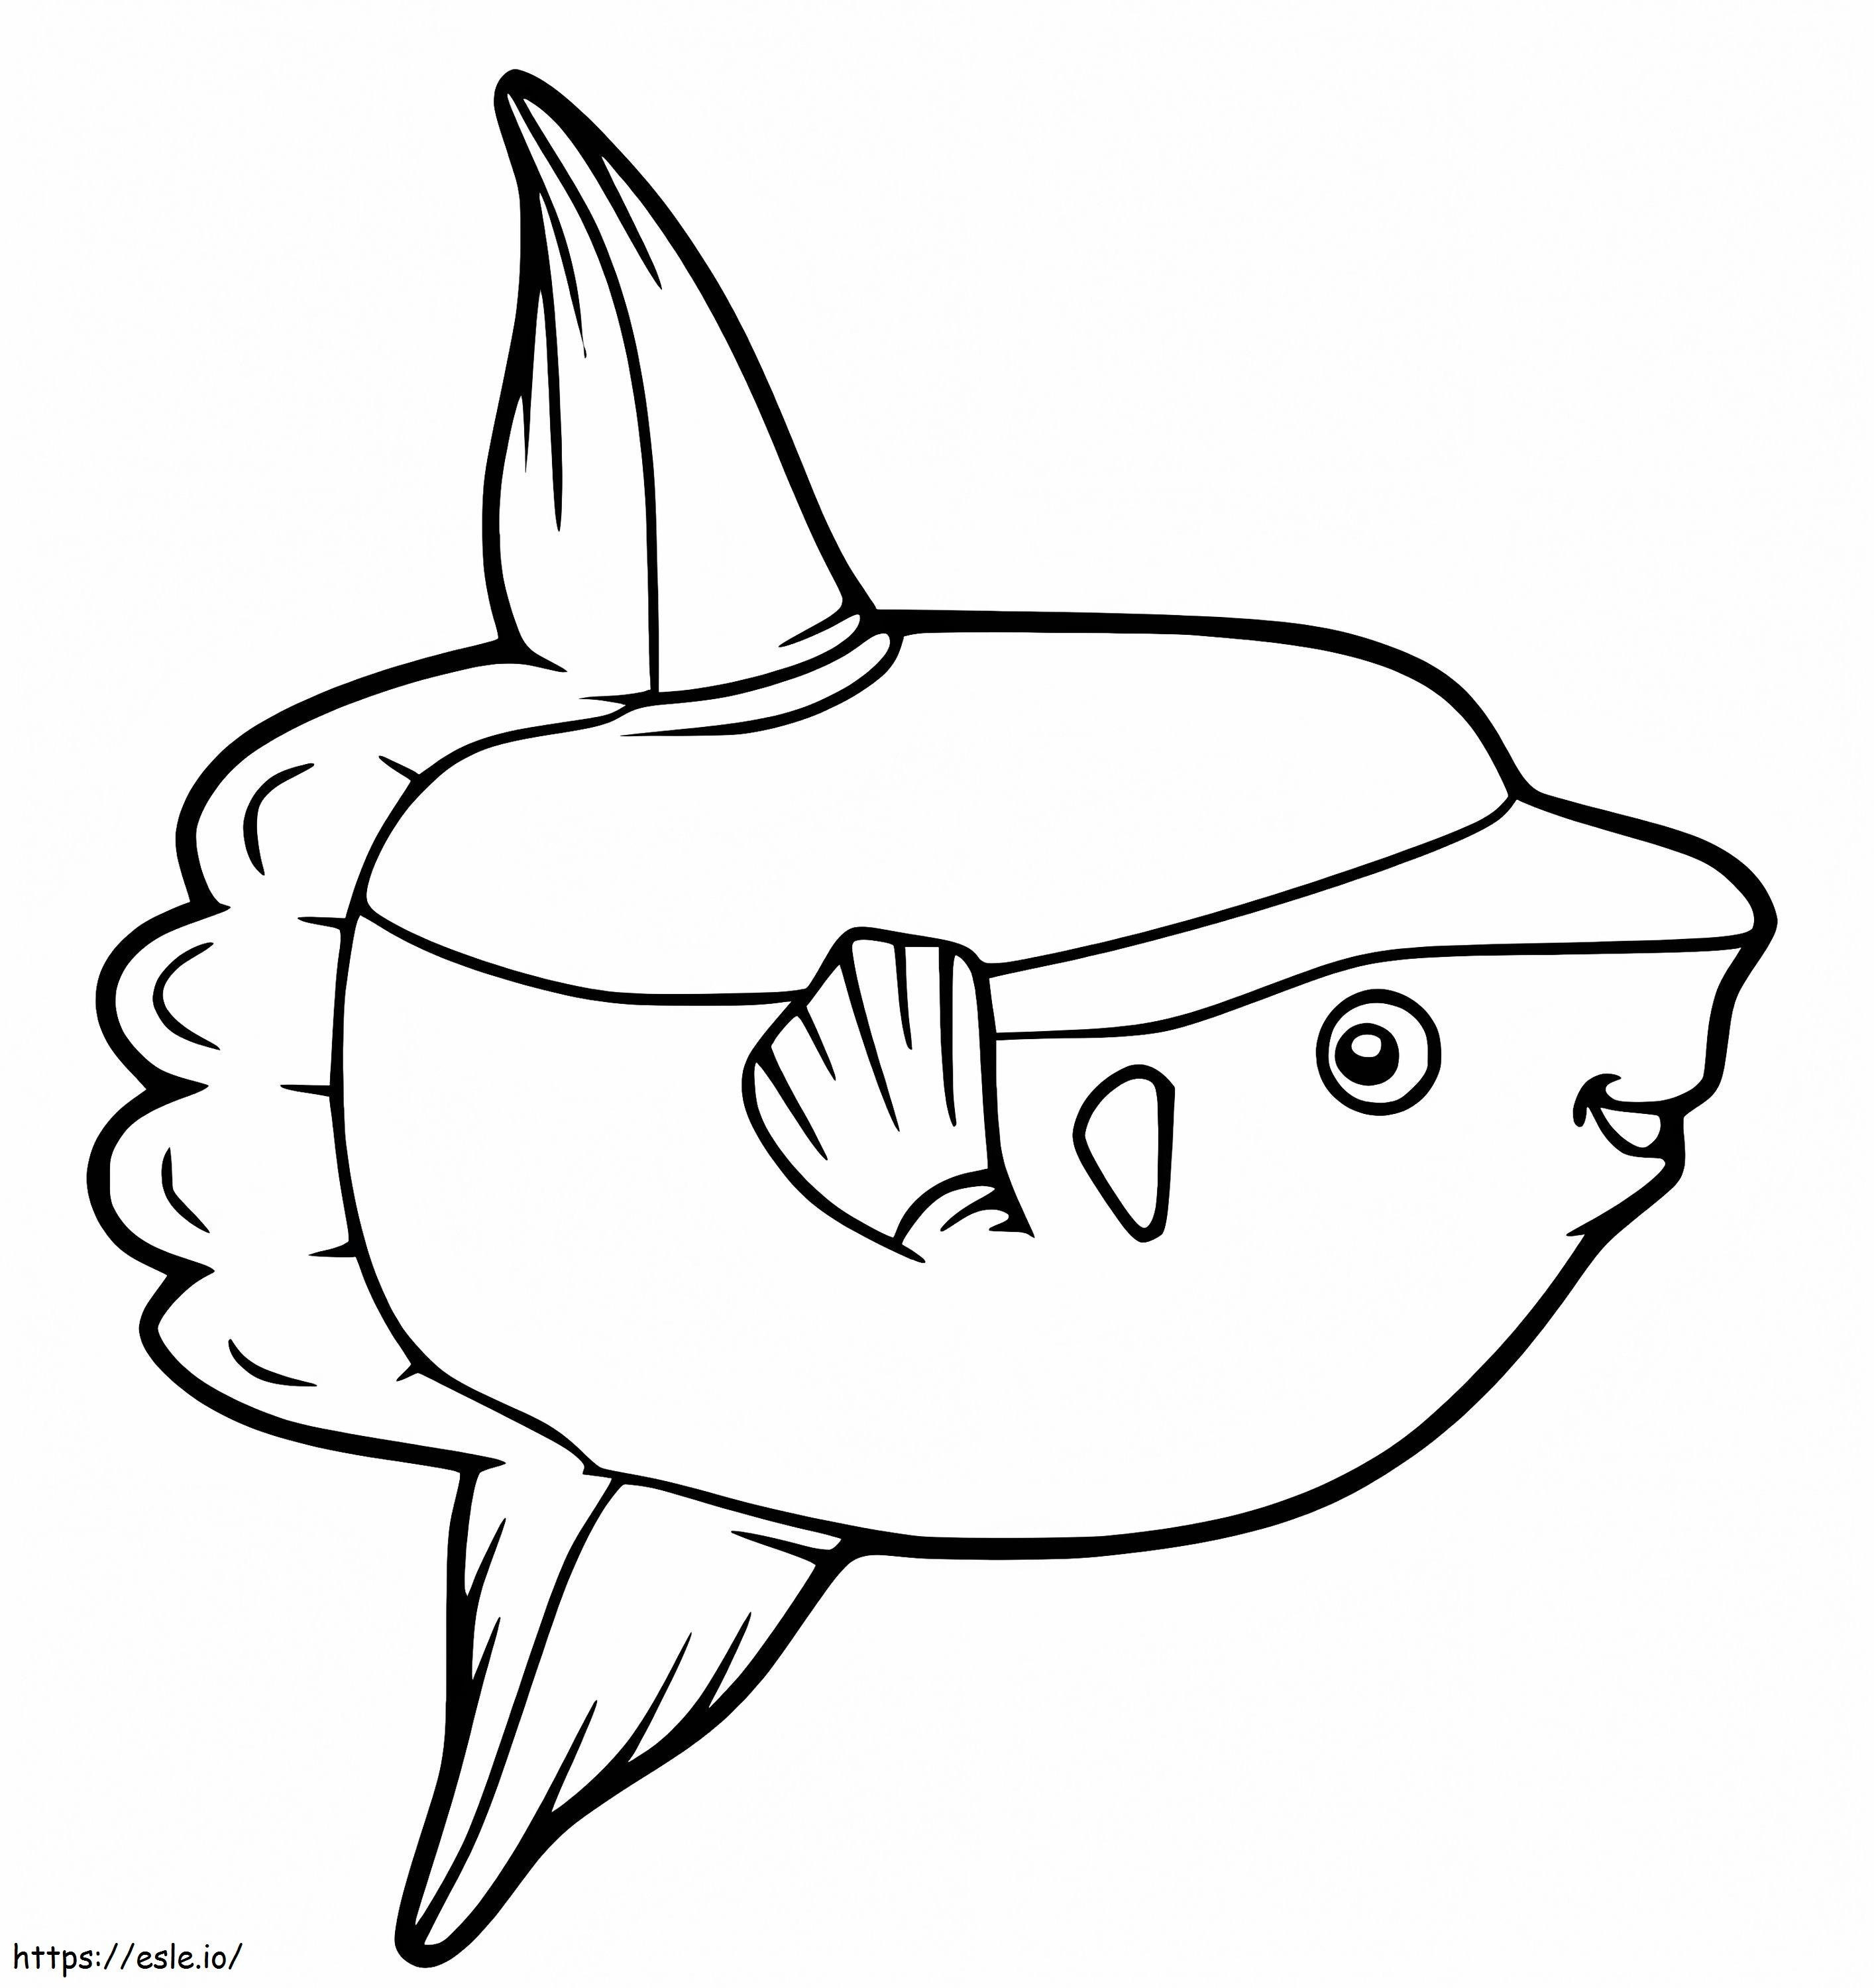 Cute Sunfish coloring page